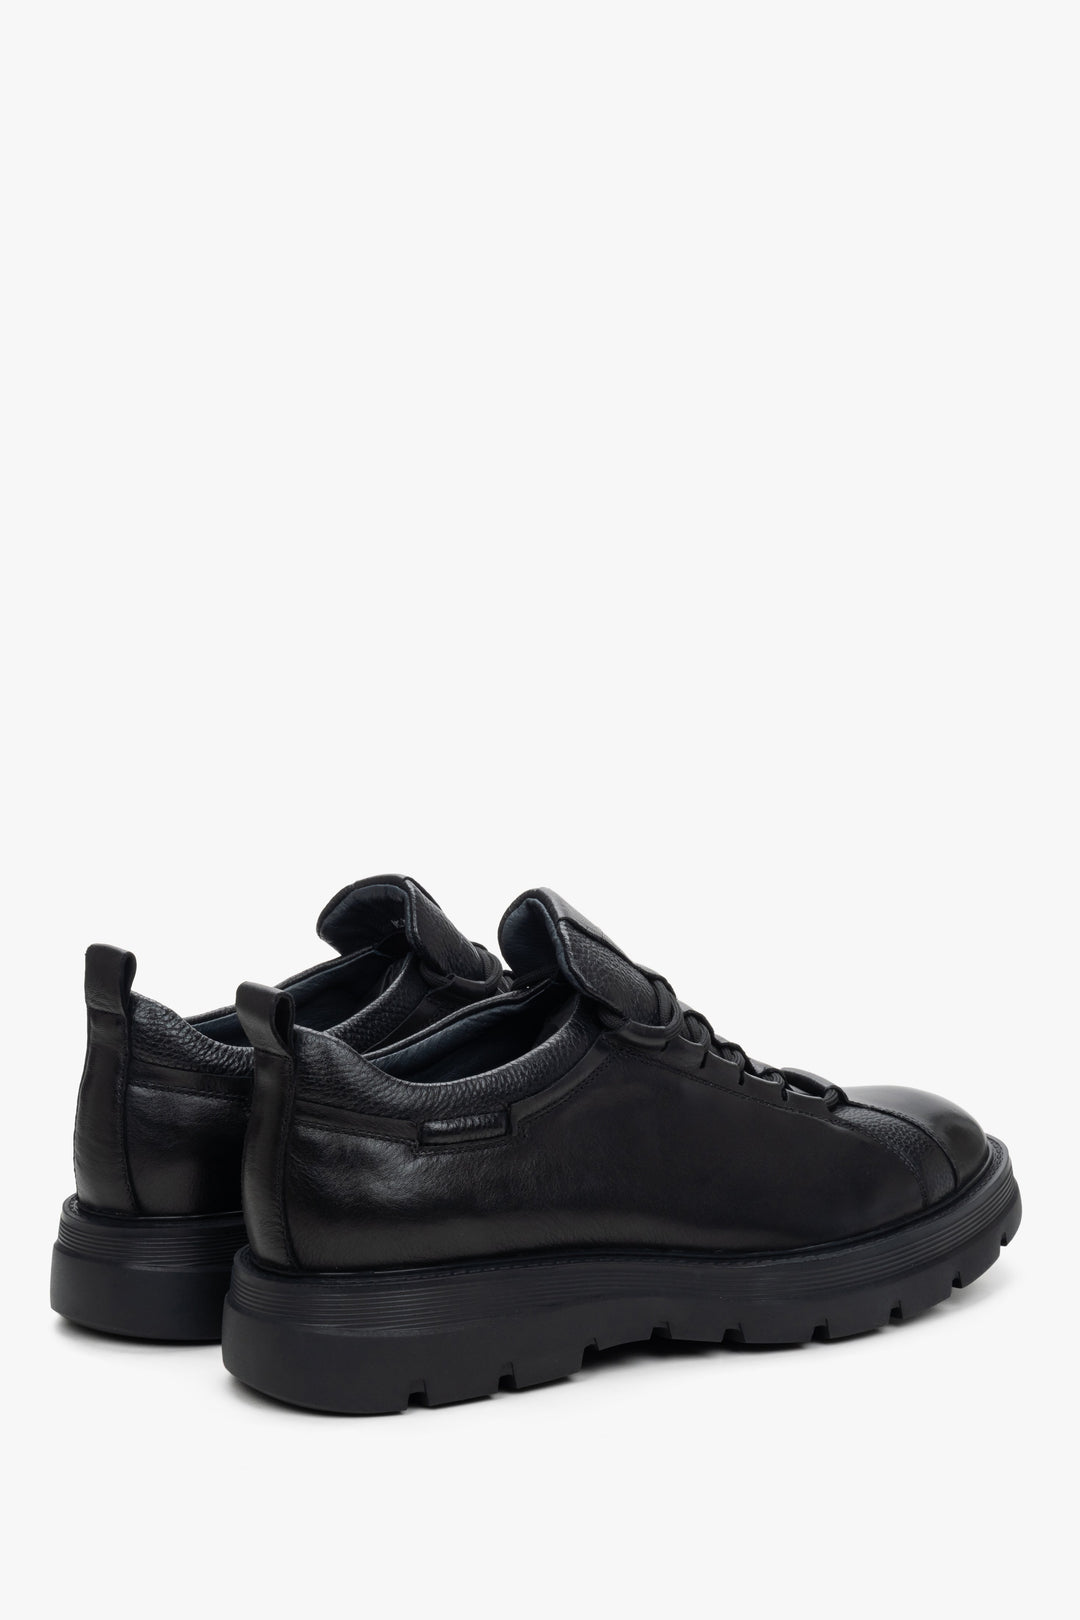 Men's black leather sneakers - close-up on the side line and heel.